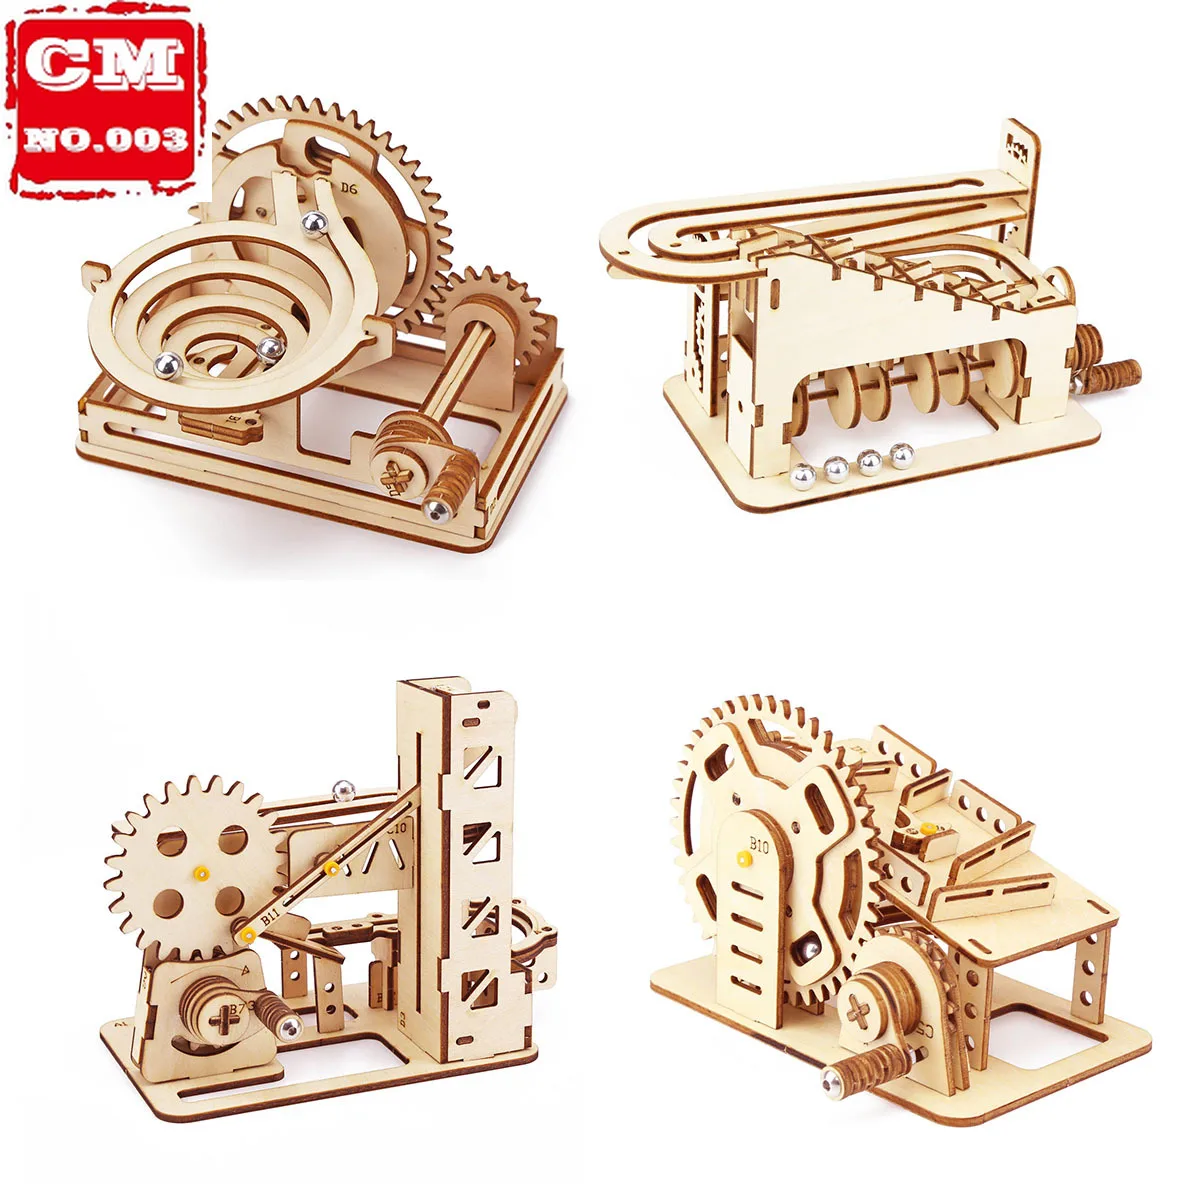 

4 Kinds Marble Race Run 3D Wooden Puzzle Mechanical Kit Stem Science Physics Toy Maze Ball Assembly Model Building For Kids